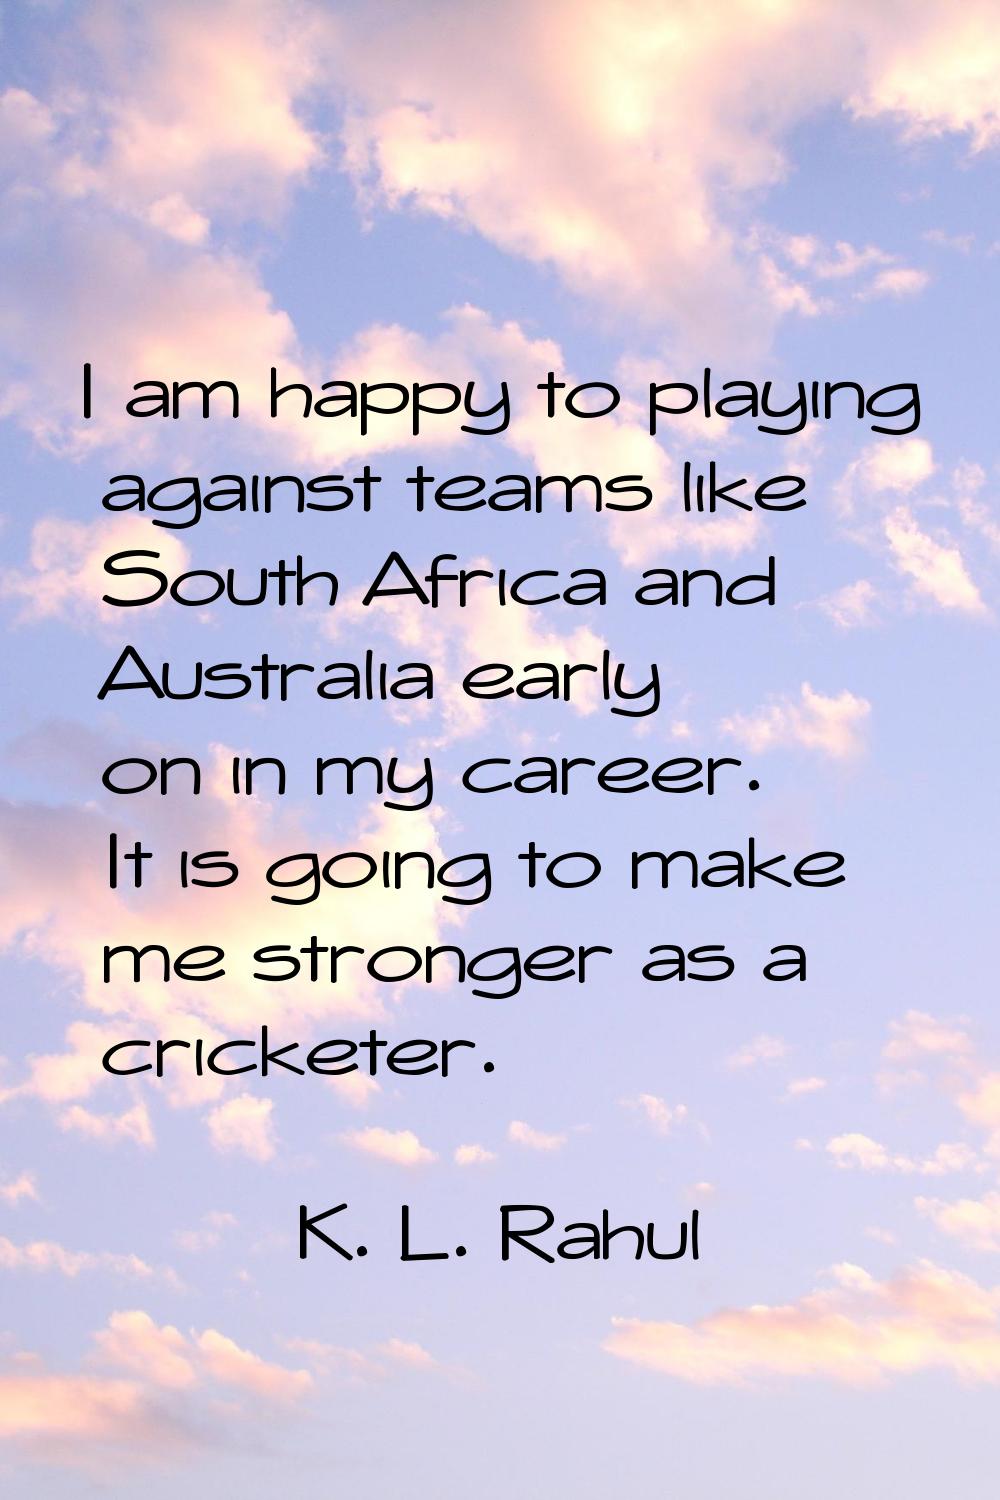 I am happy to playing against teams like South Africa and Australia early on in my career. It is go